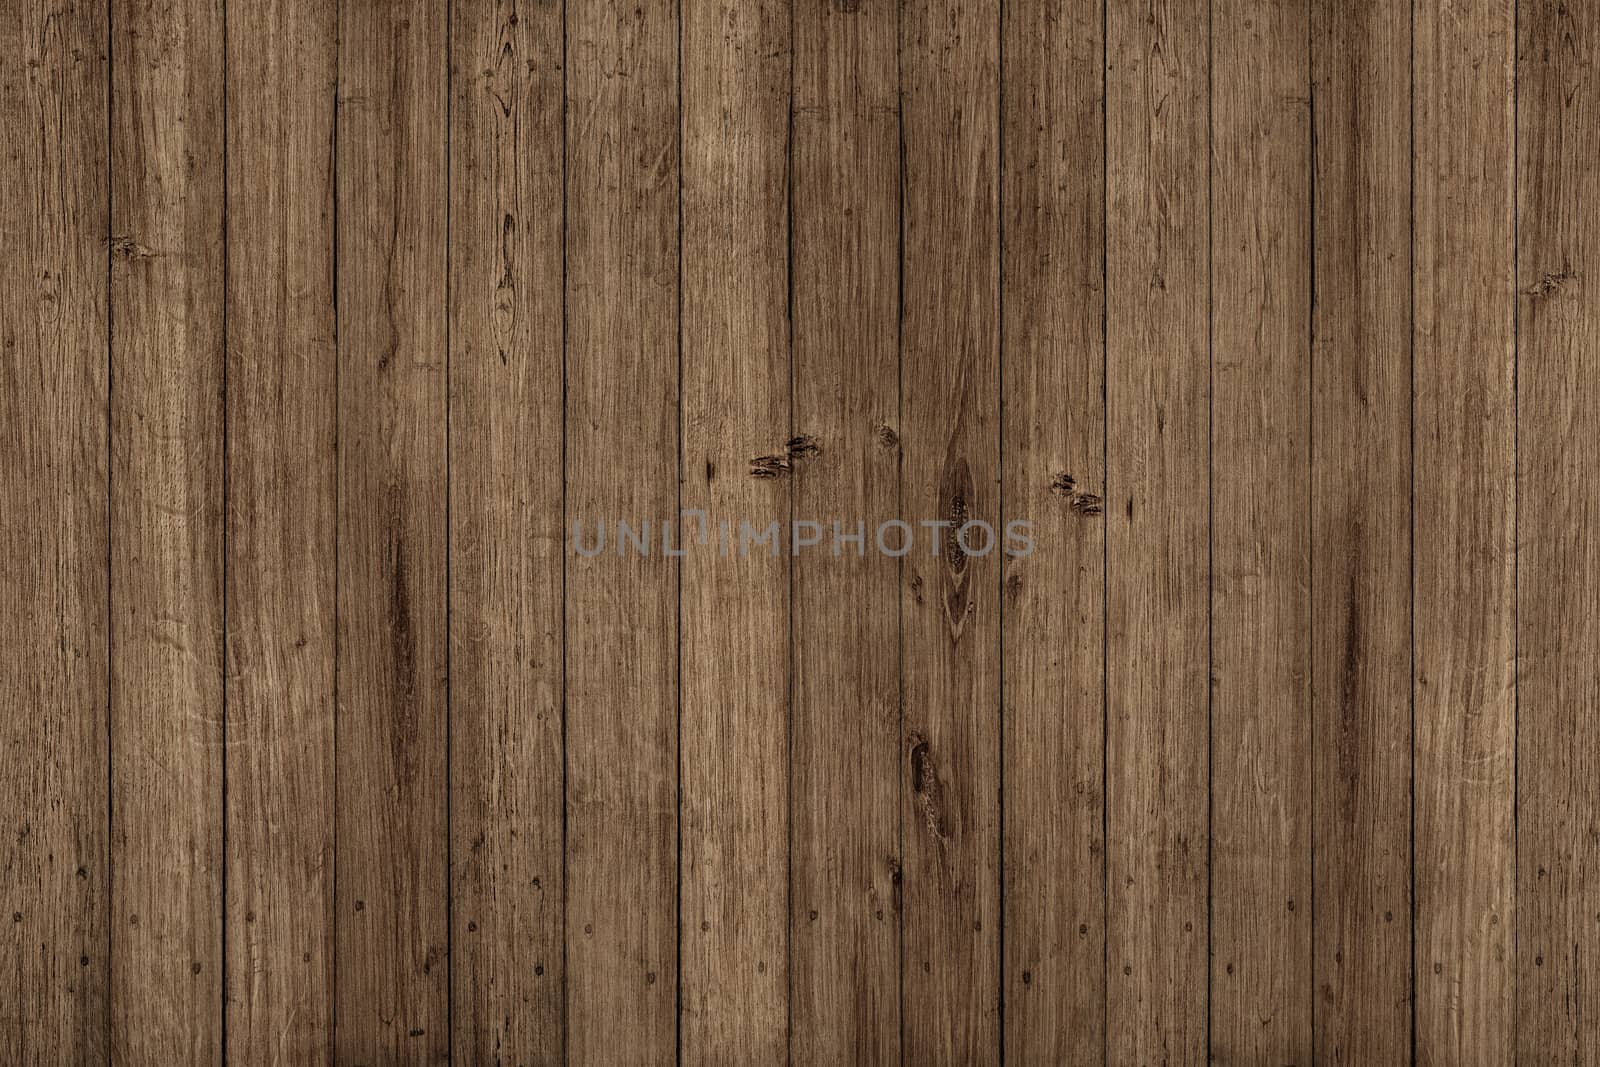 grunge wood panels by ivo_13